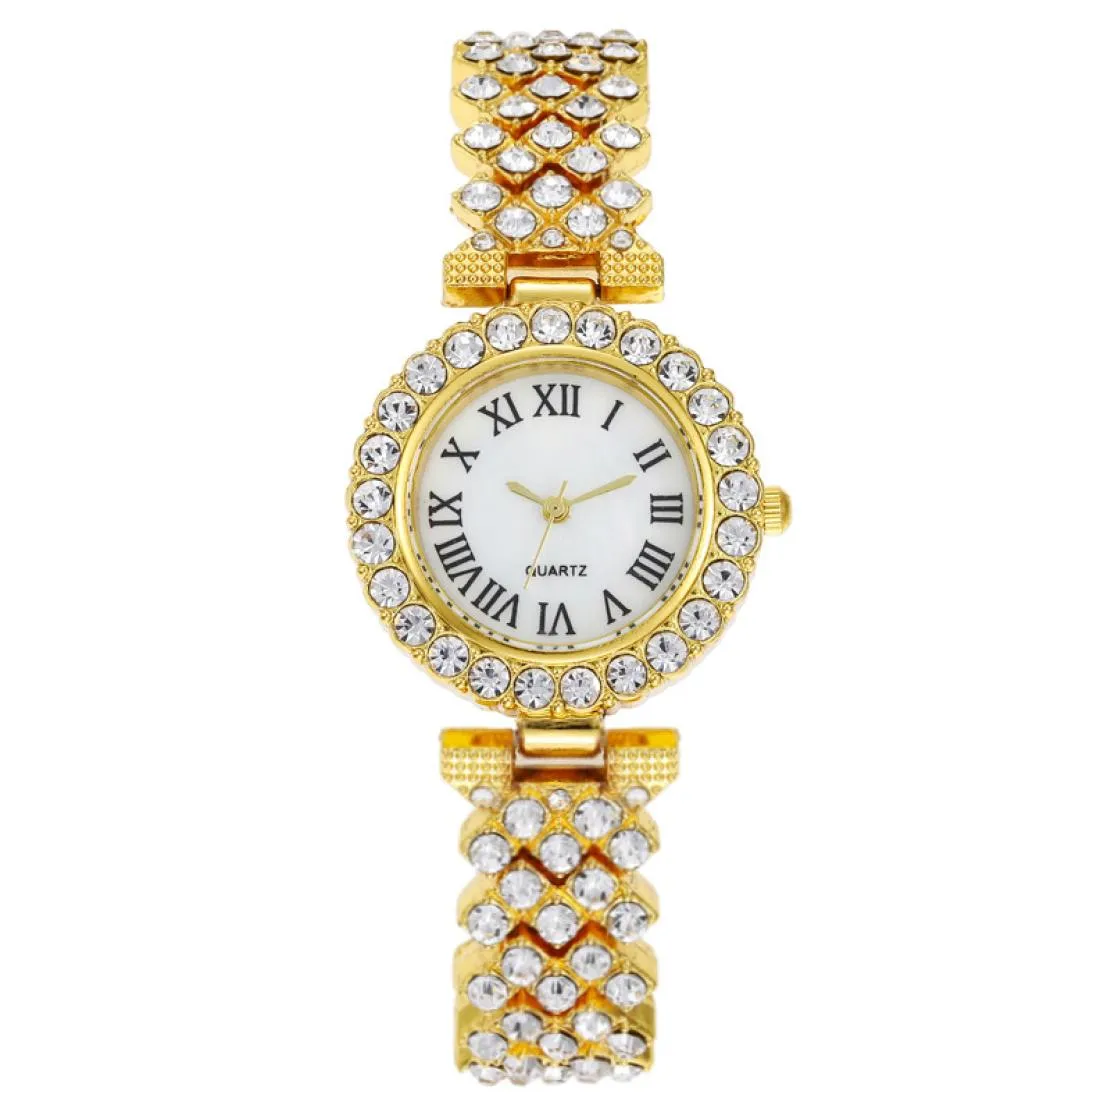 Luxury Delicate Women039s Watch Gift Inlaid Diamond Quartz Analog Roman Number Watches with Elegant Bracelet Suit for Lady Girl9849419